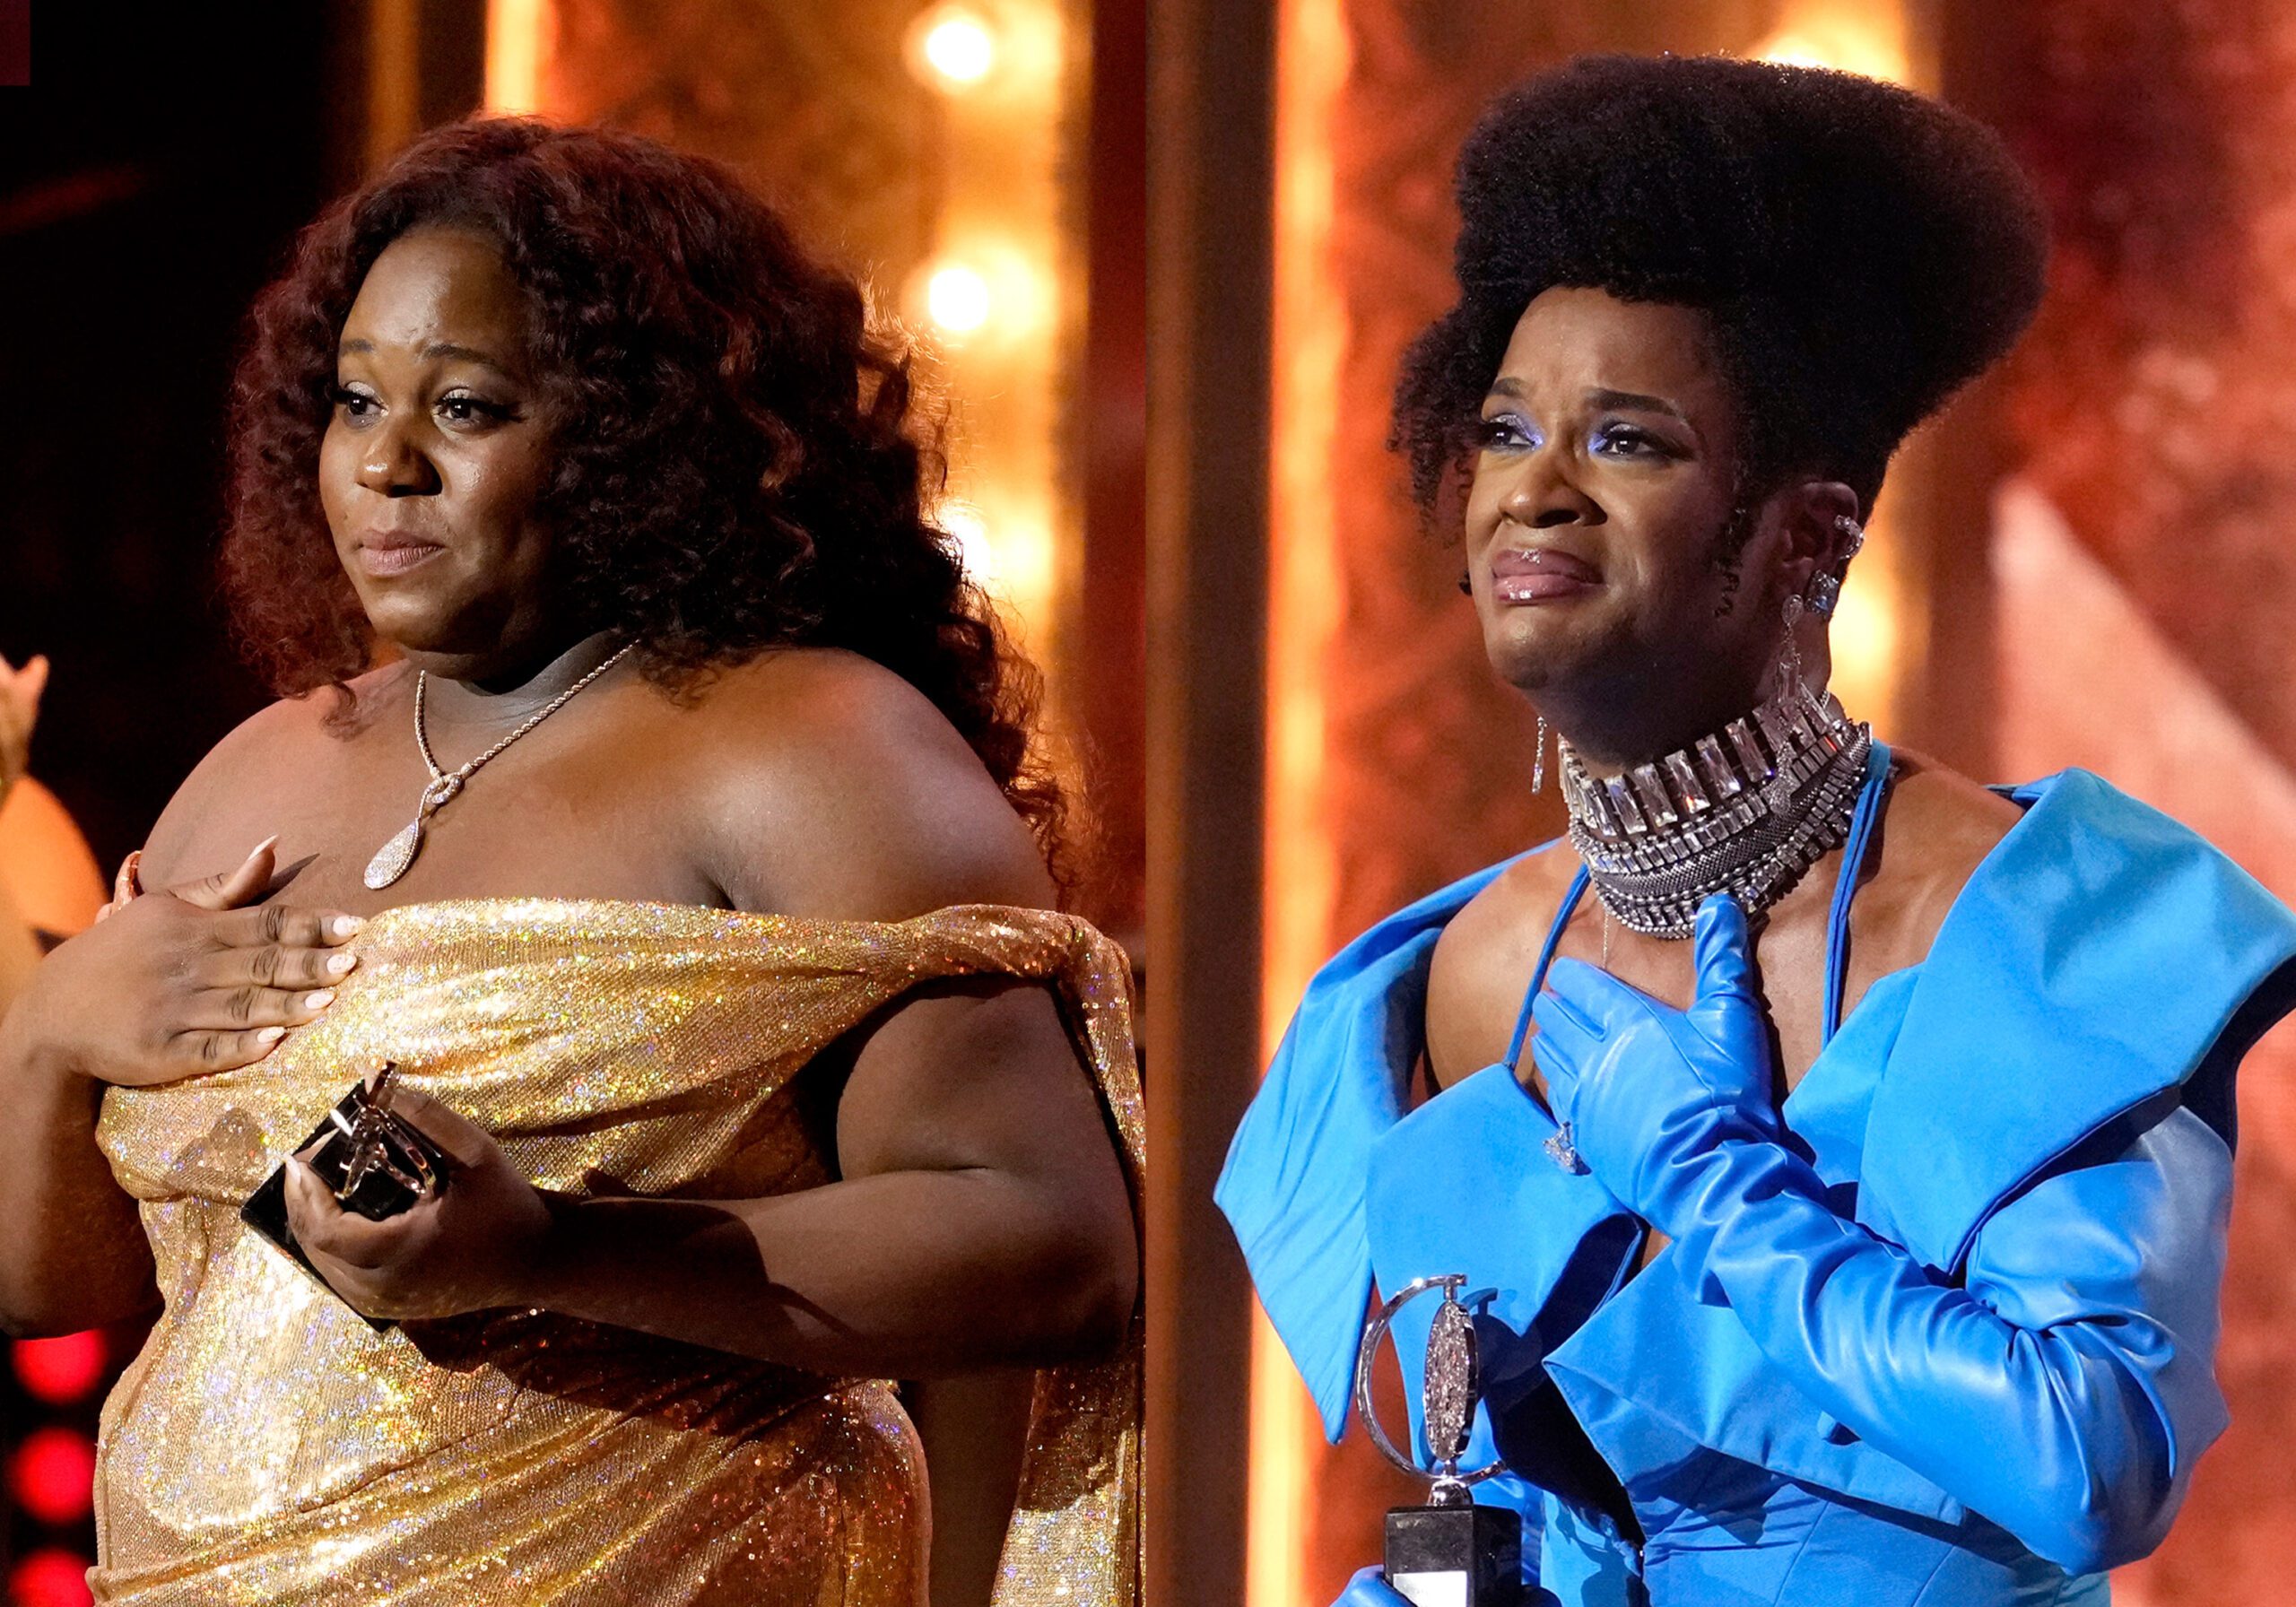 actors-j-harrison-ghee-and-alex-newell-make-history-as-the-first-openly-nonbinary-tony-award-recipients-for-acting